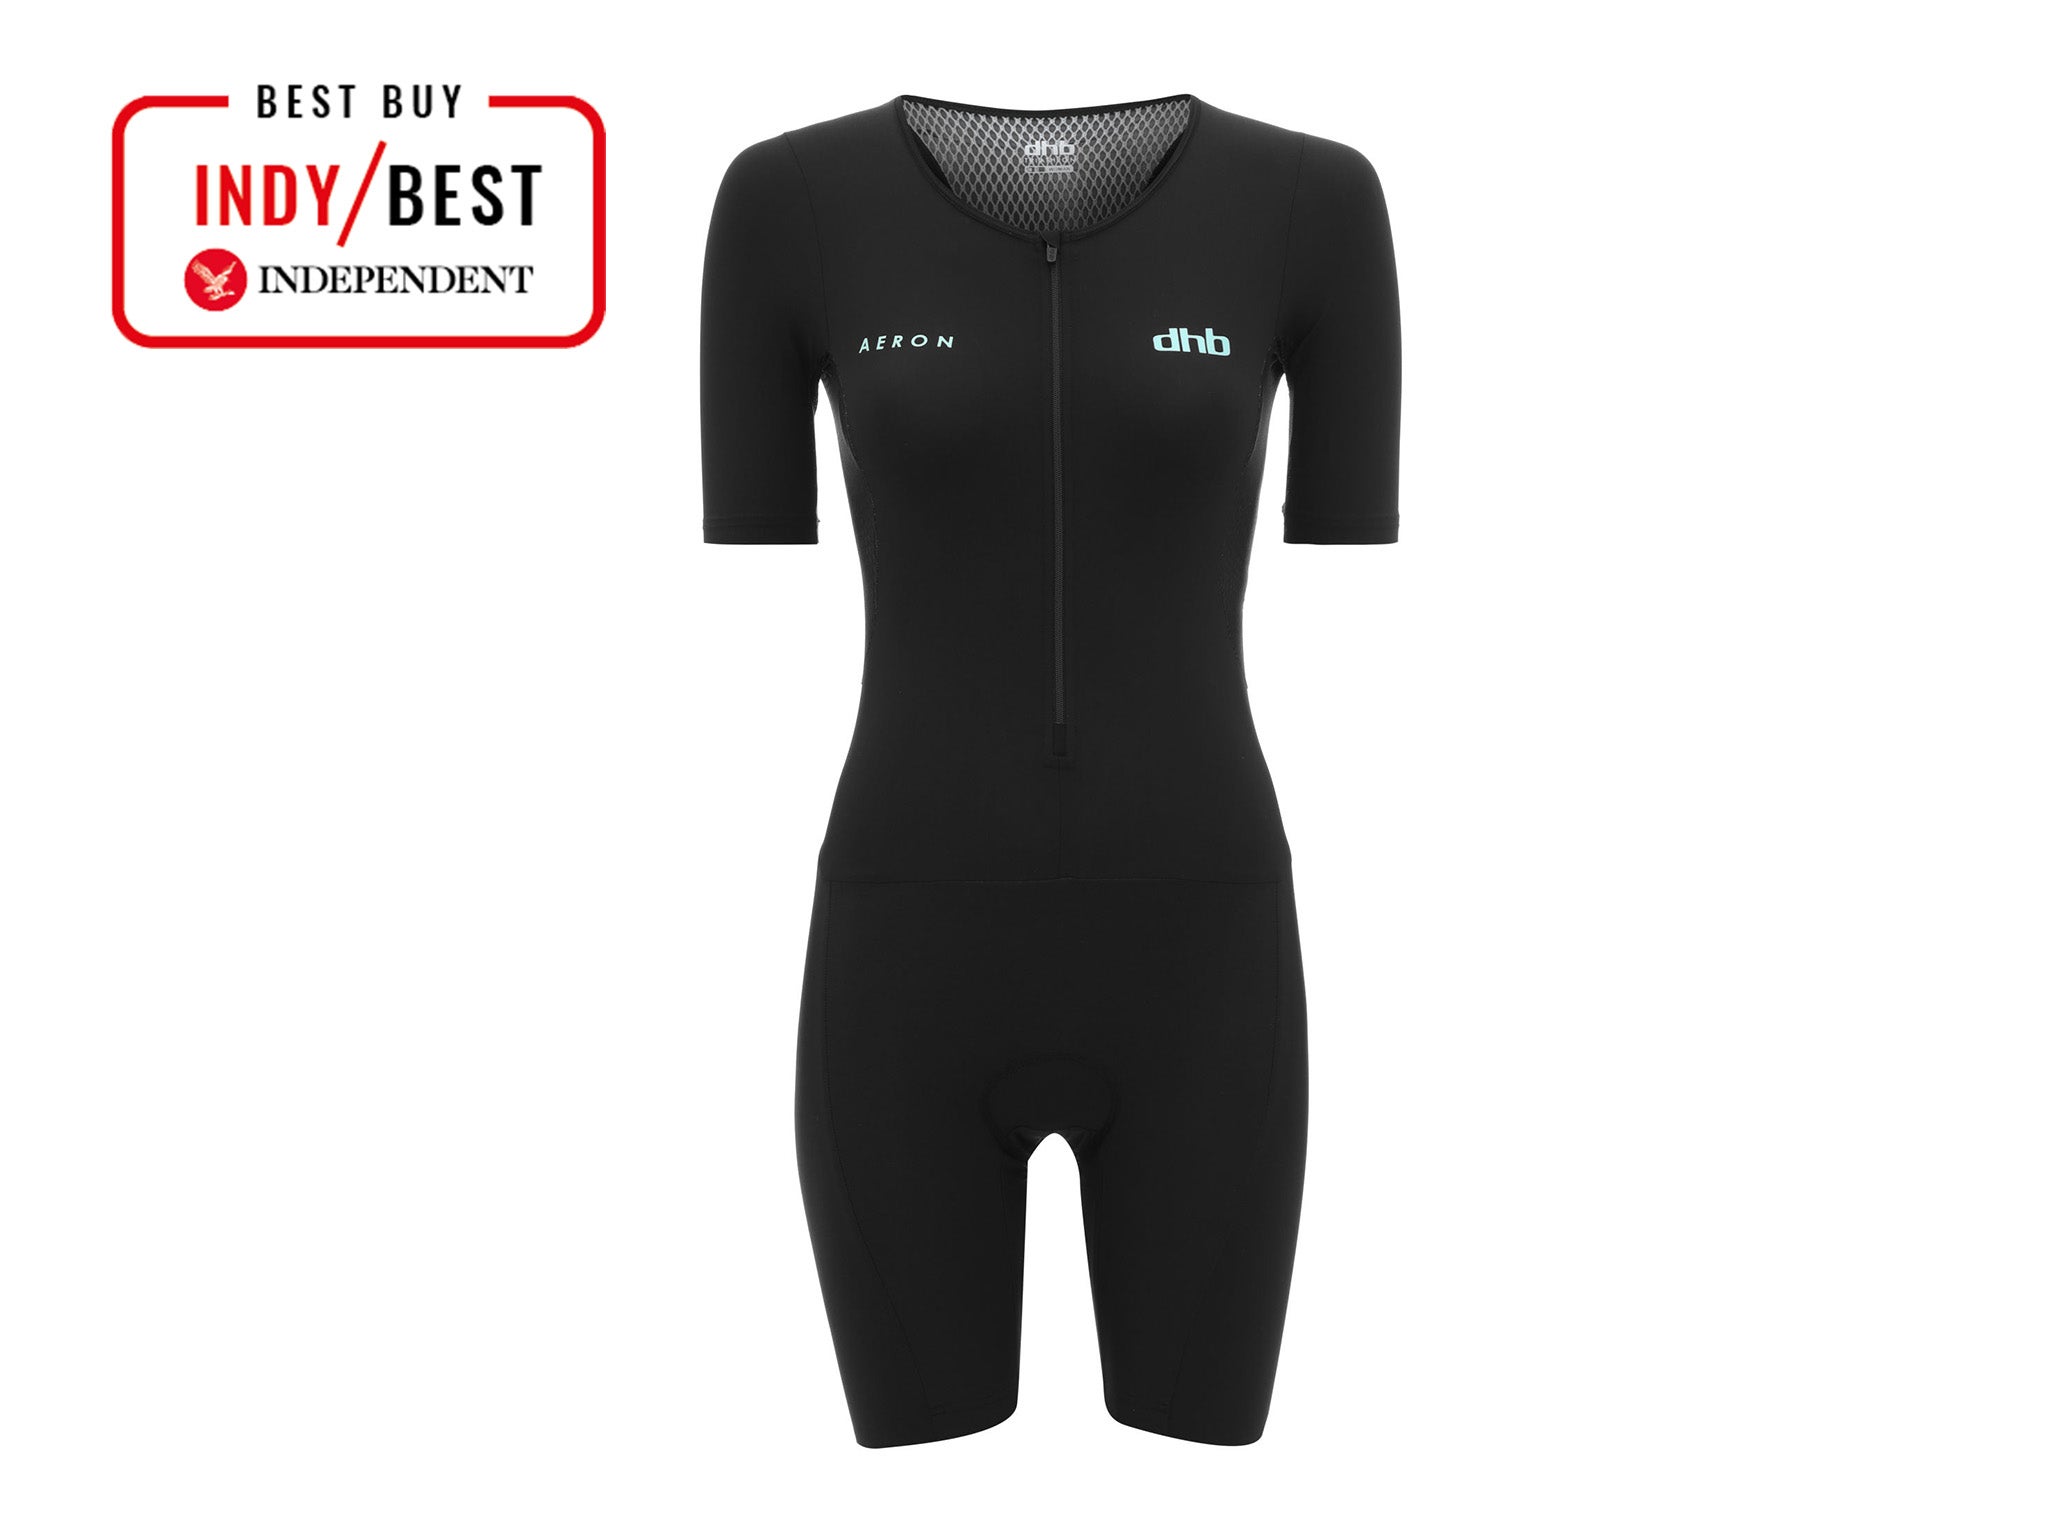 6 best women's tri suits, The Independent